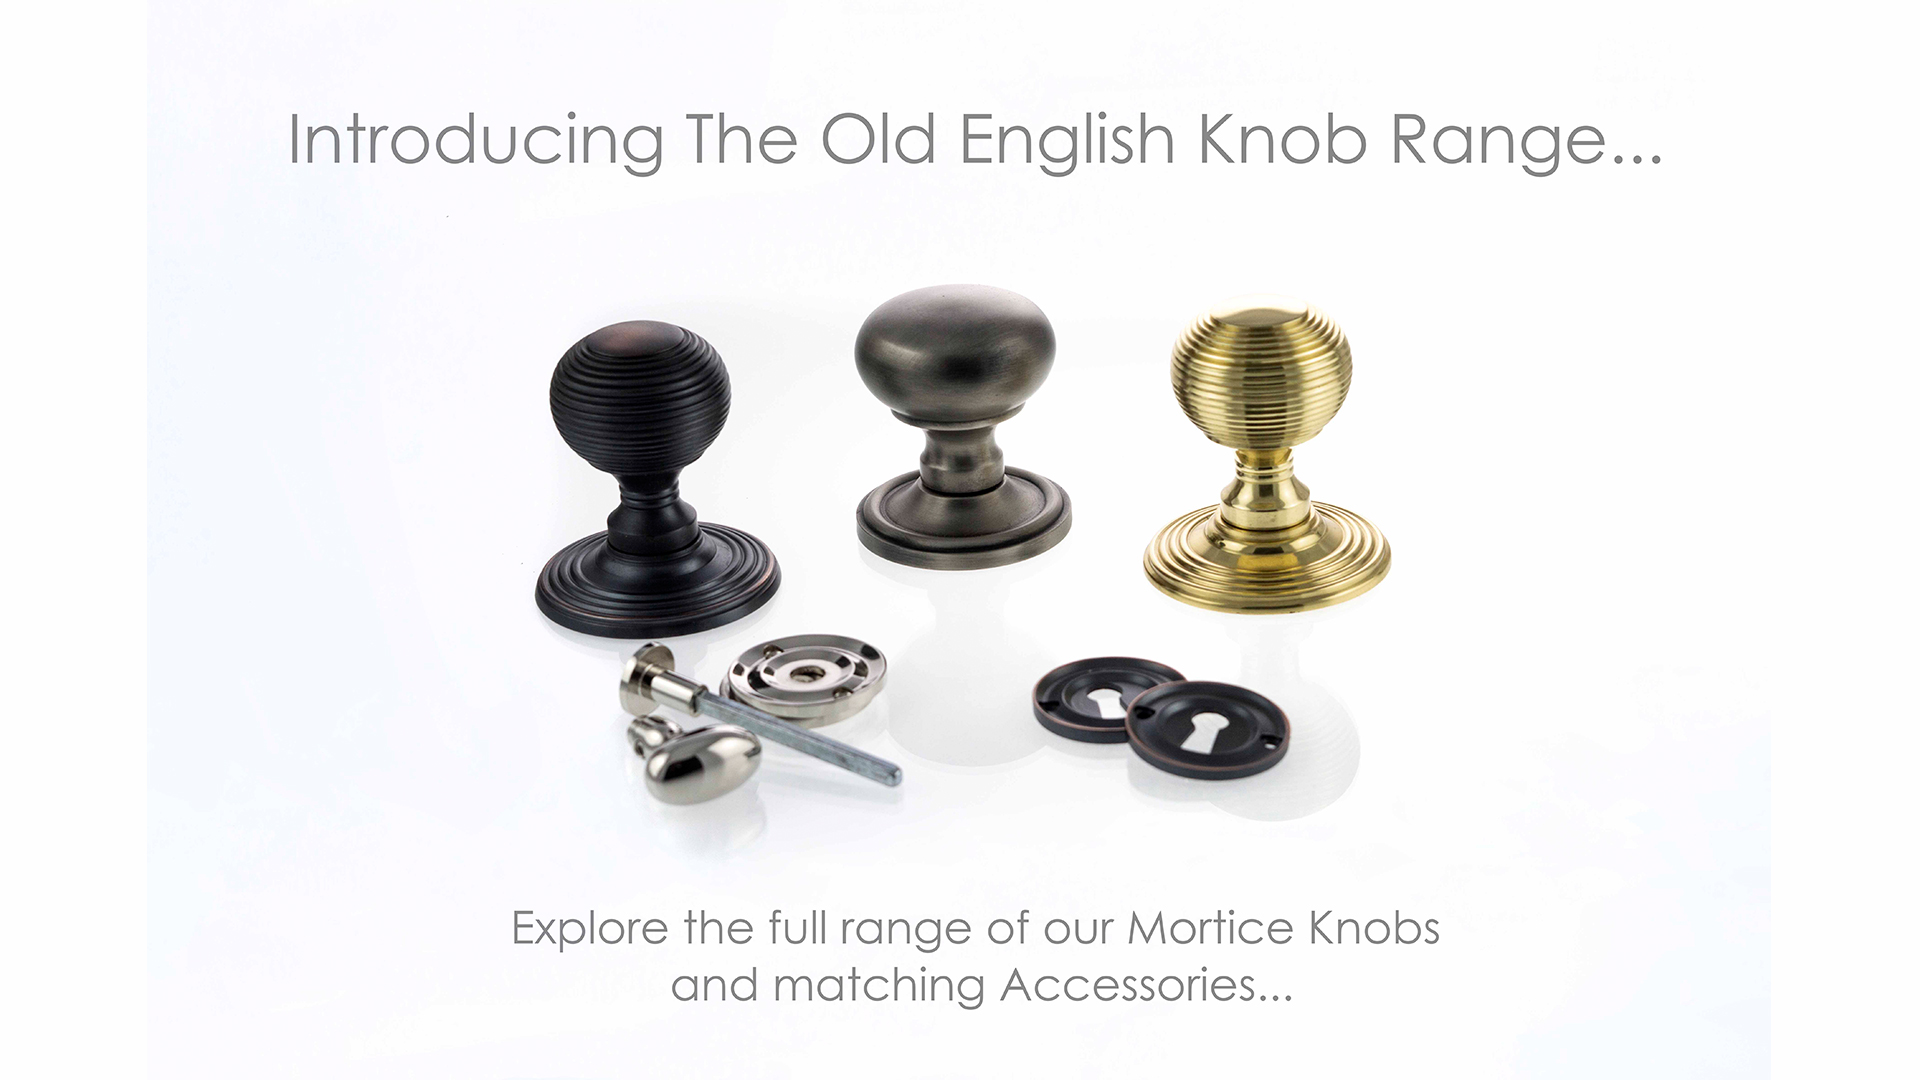 Introducing Old English Knobs!